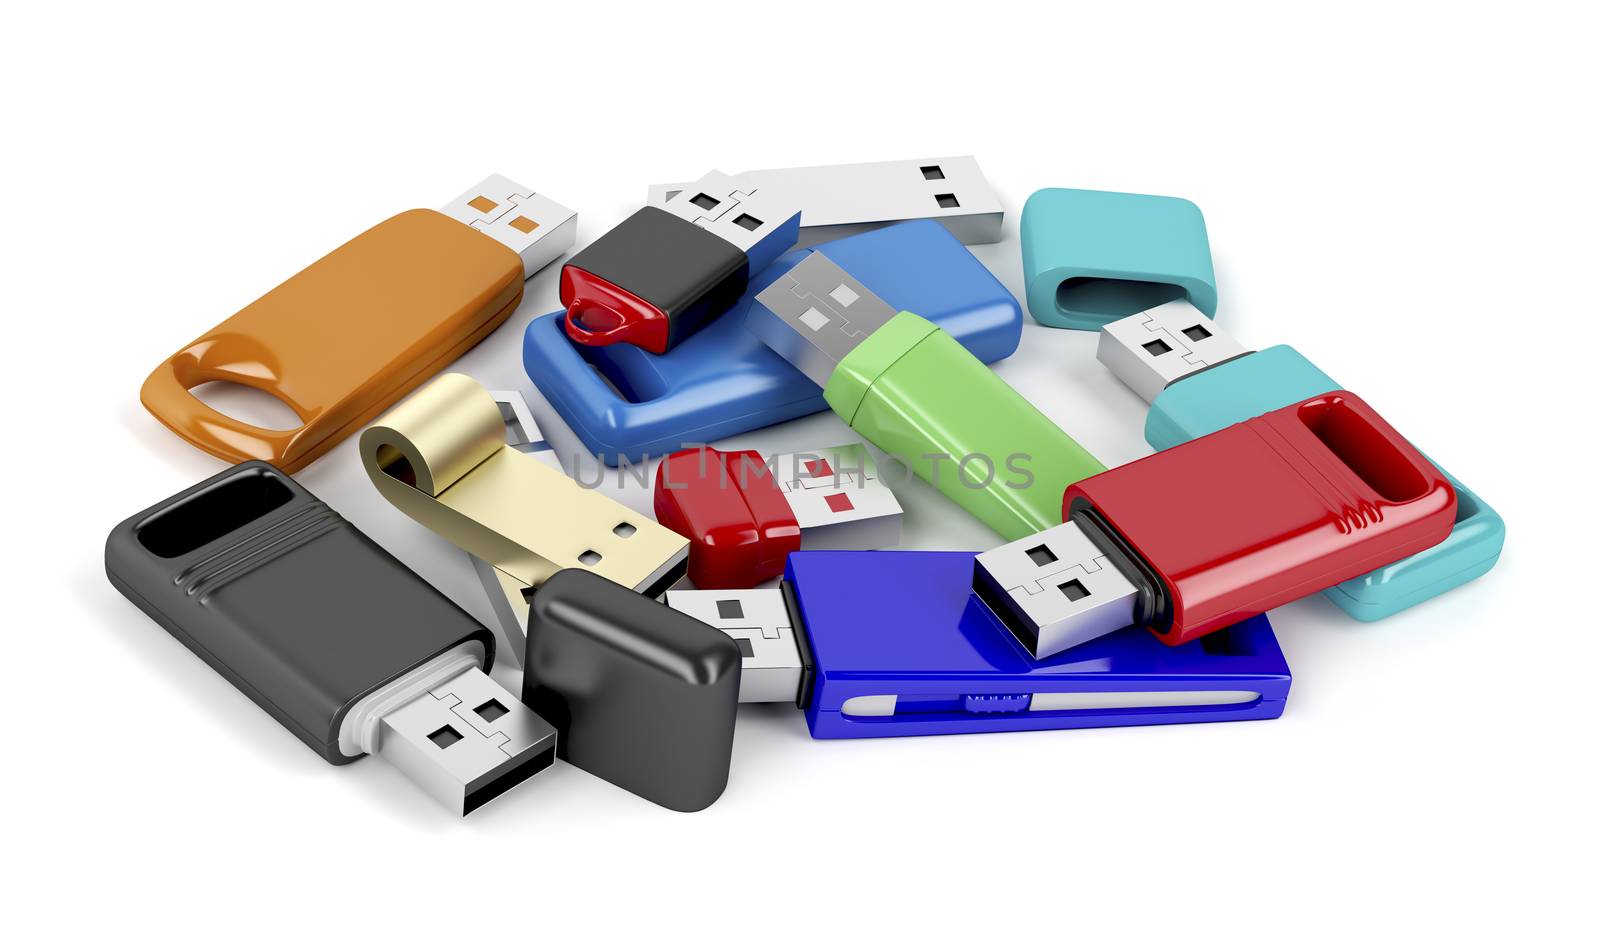 Bunch of usb memory sticks with different designs and colors 